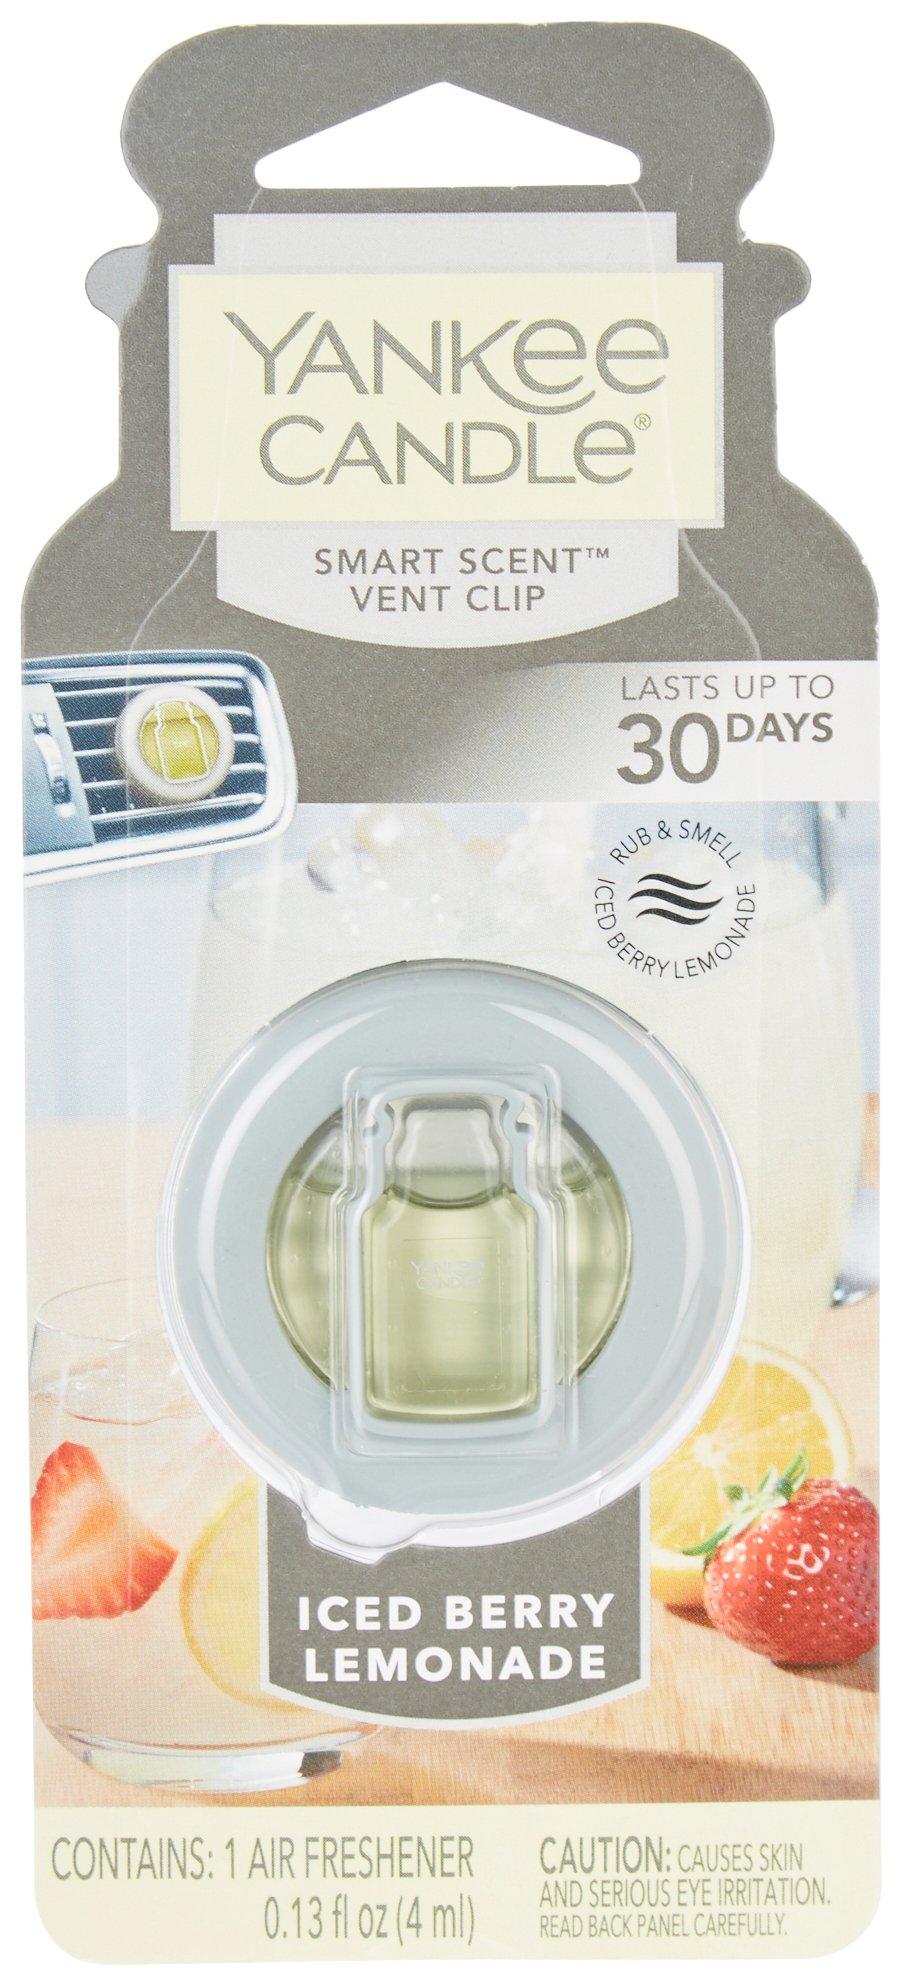 Yankee Candle Ice Berry Lemonade Smart Scent Vent